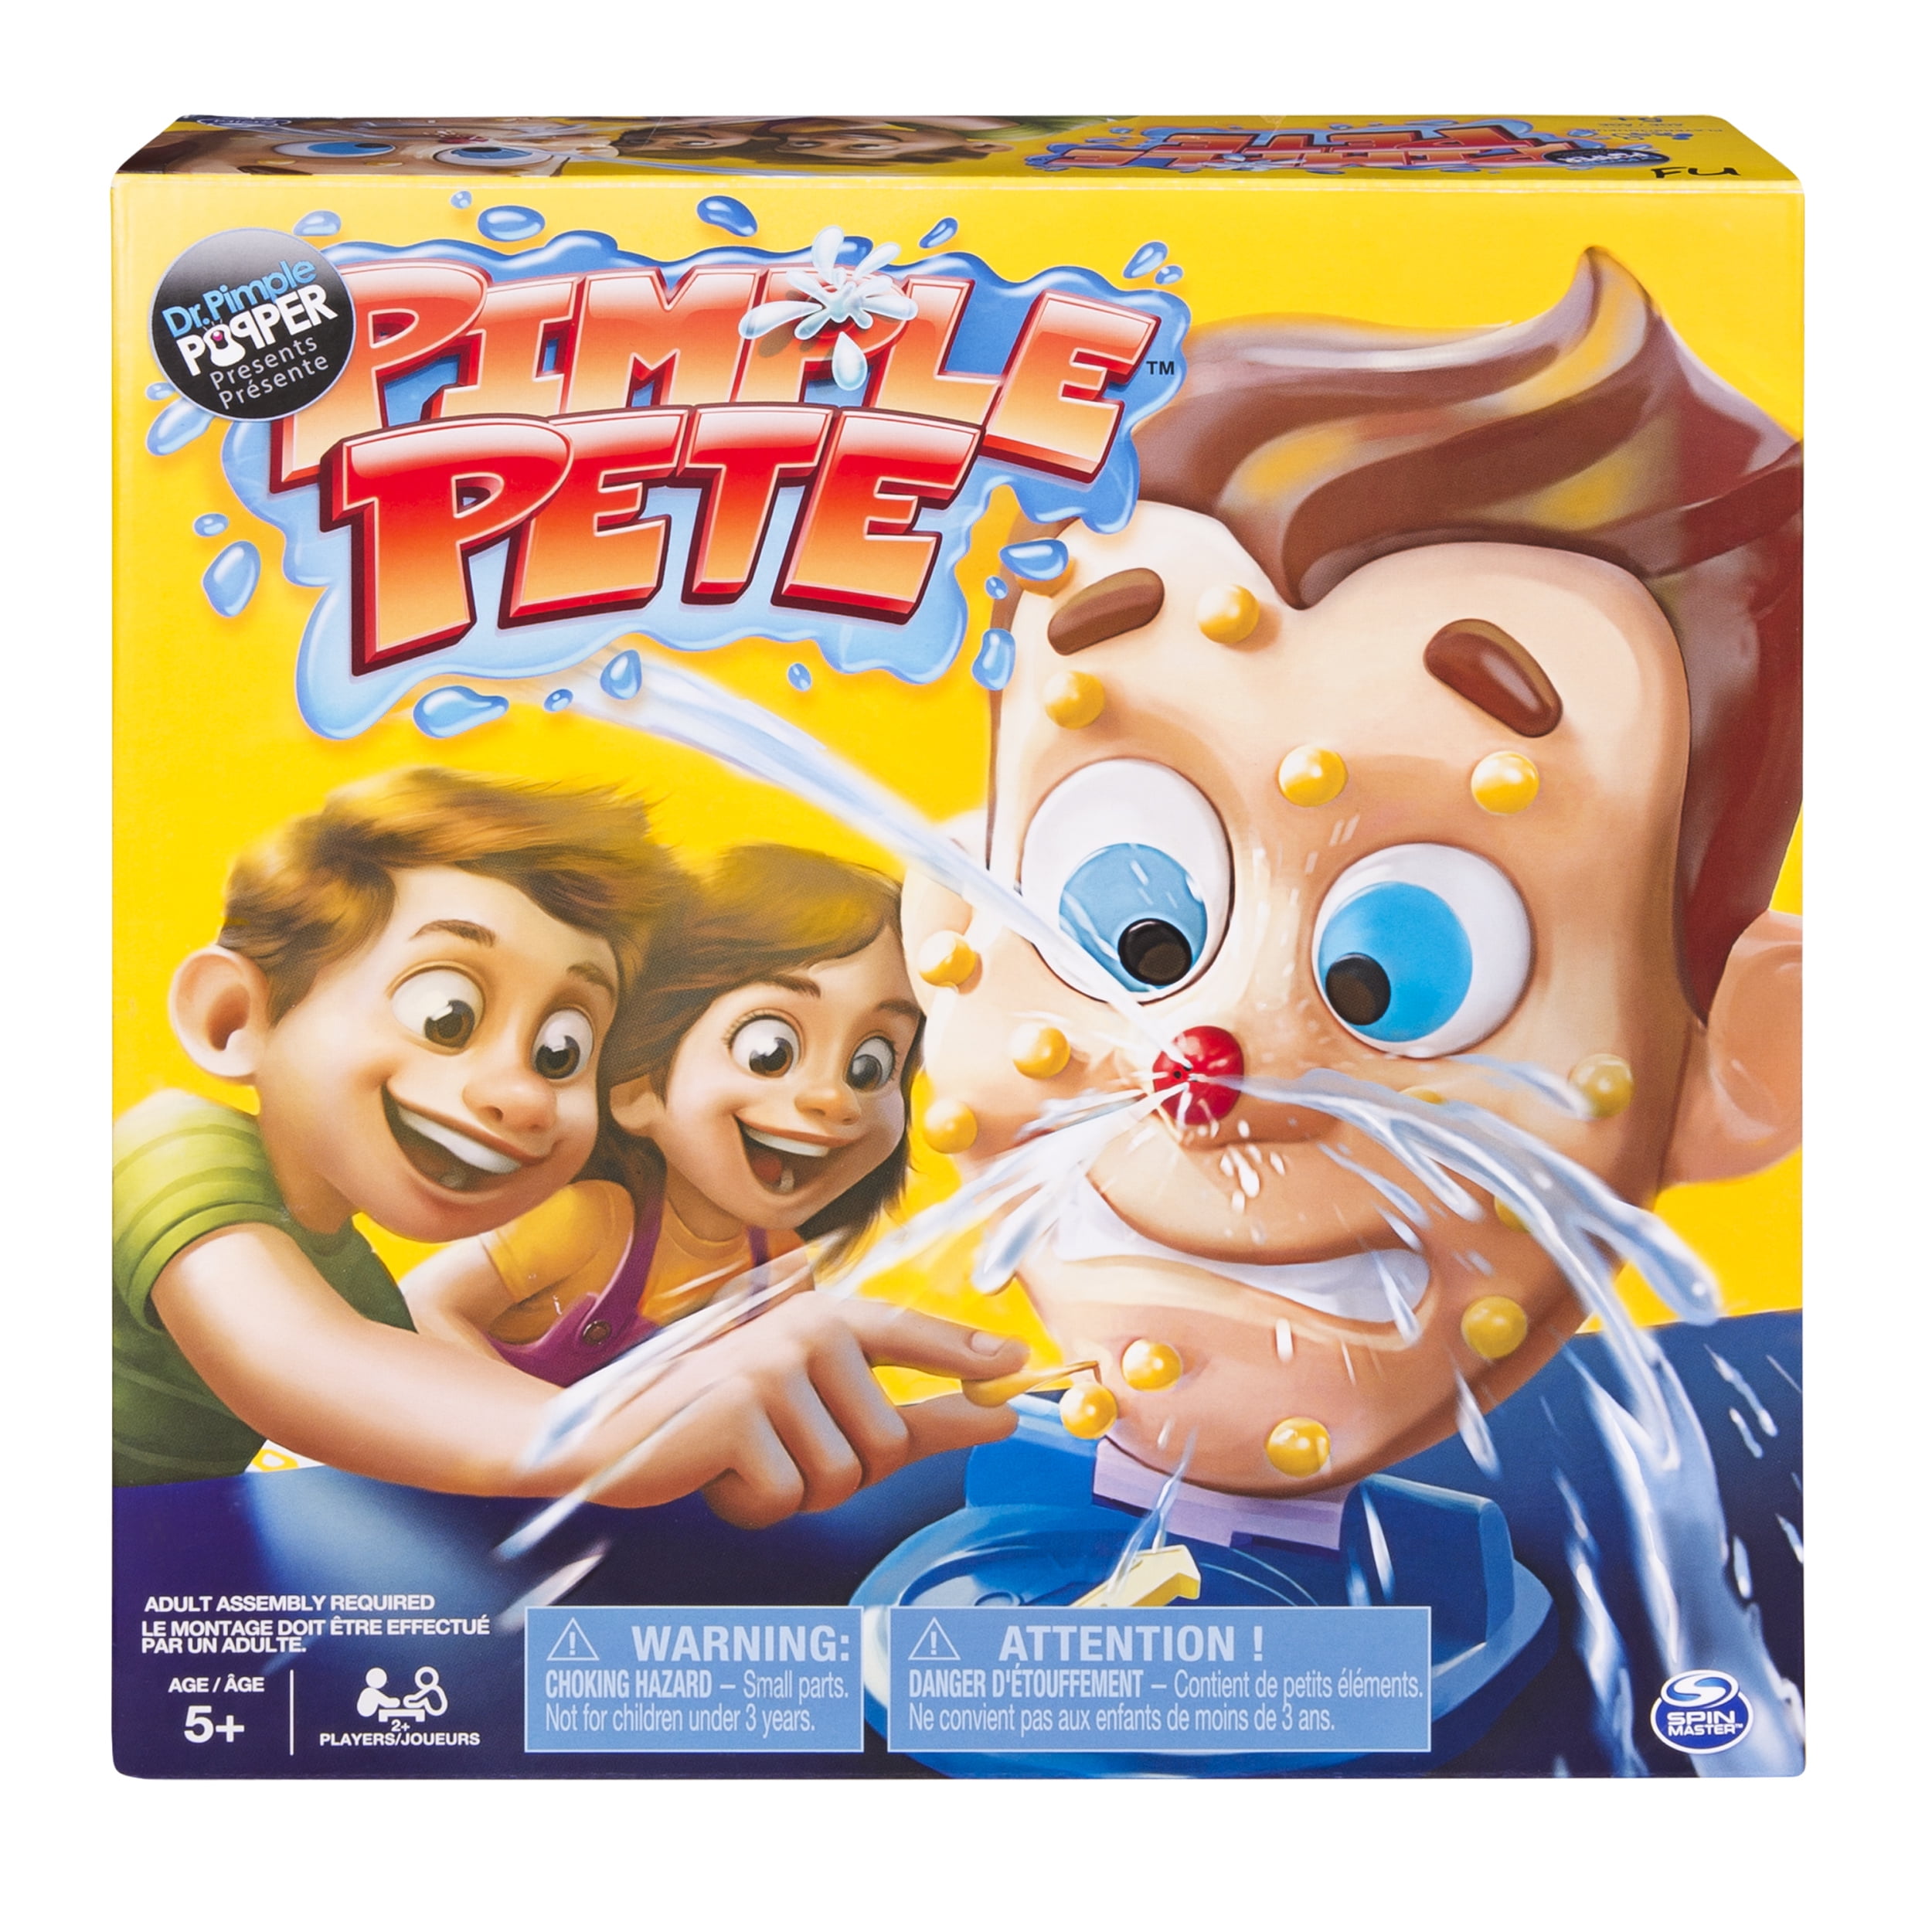 Pimple Pete Game Family Fun Game For Kids & Adults from Dr Pimple Popper NEW 